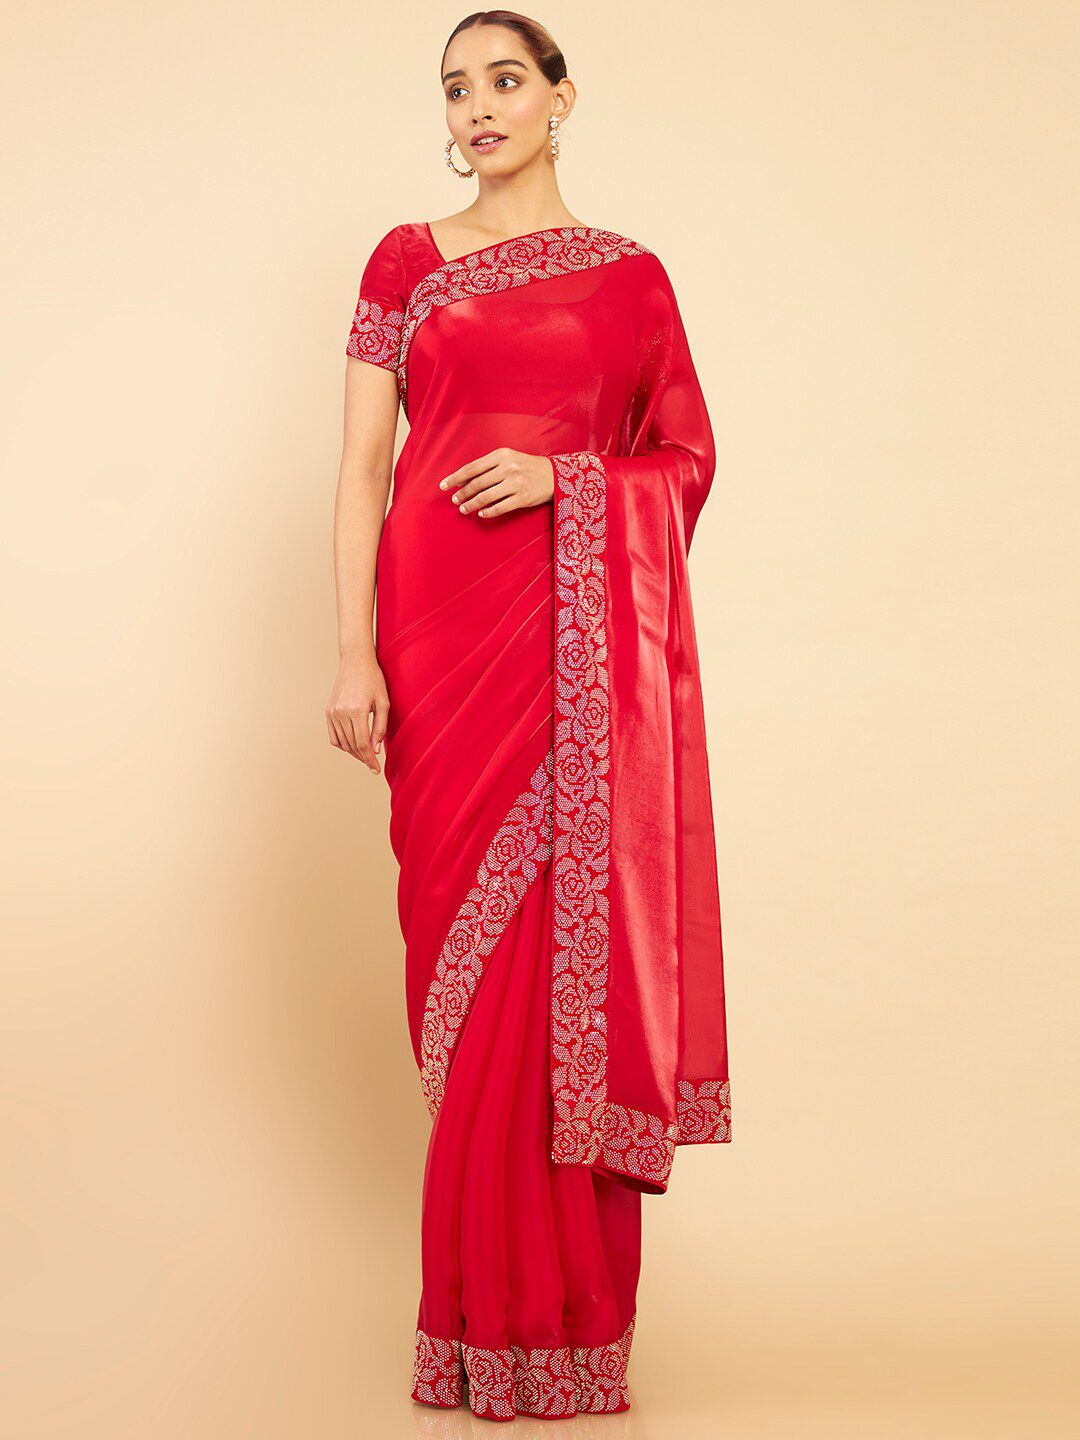 Soch Red & Silver-Toned Beads and Stones Organza Saree Price in India